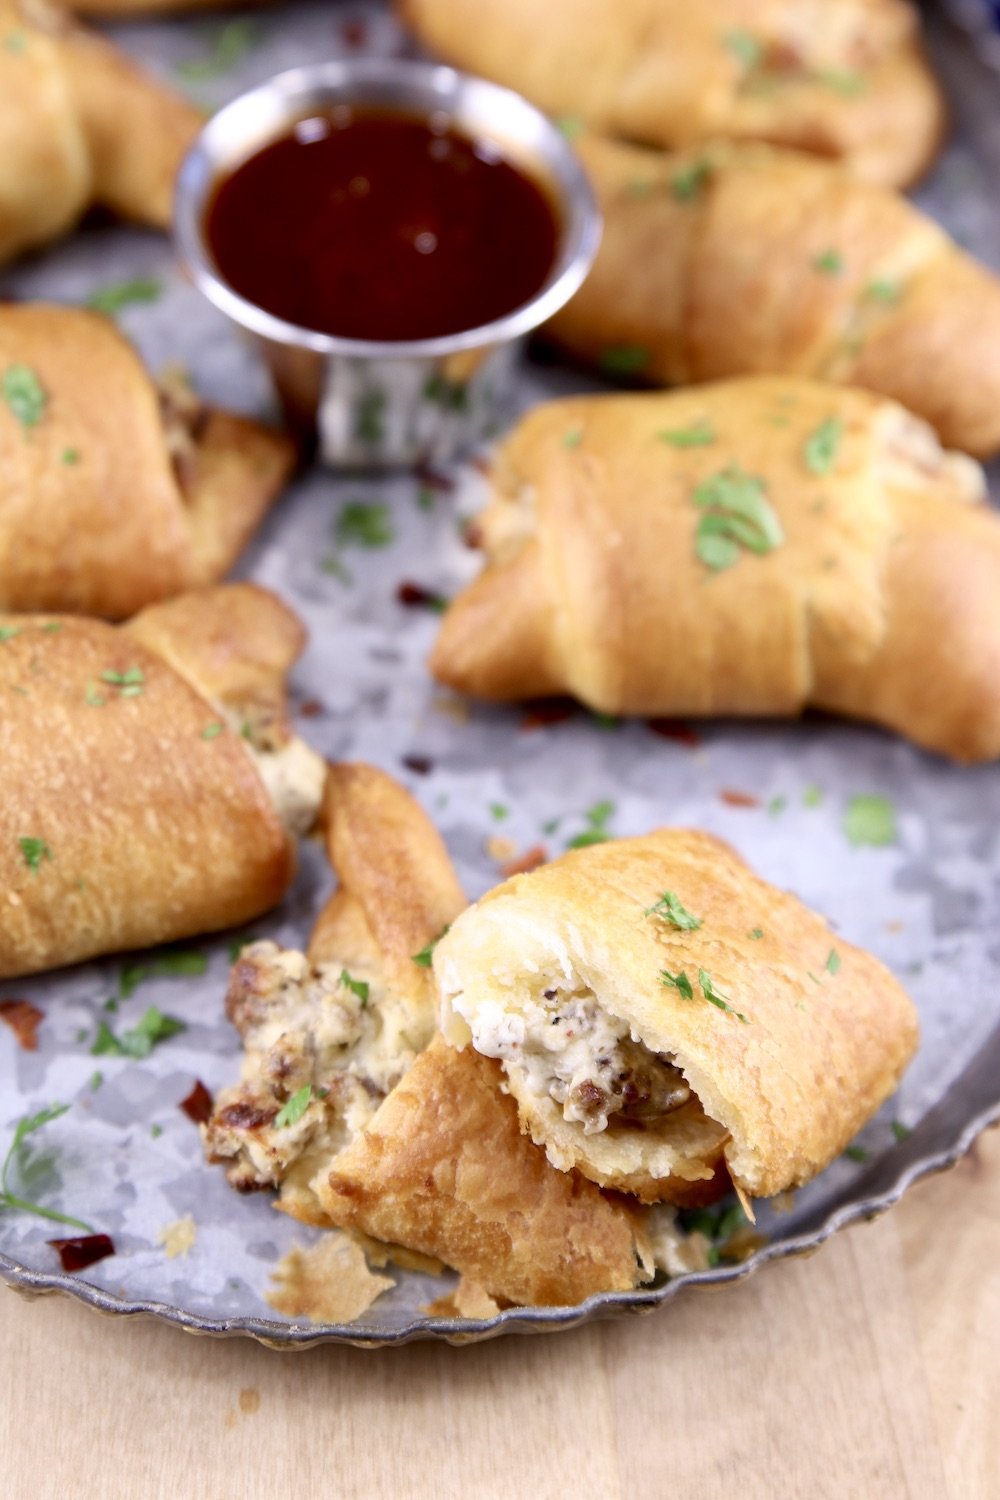 Sausage Cream Cheese Crescents with one broke in two on a platter